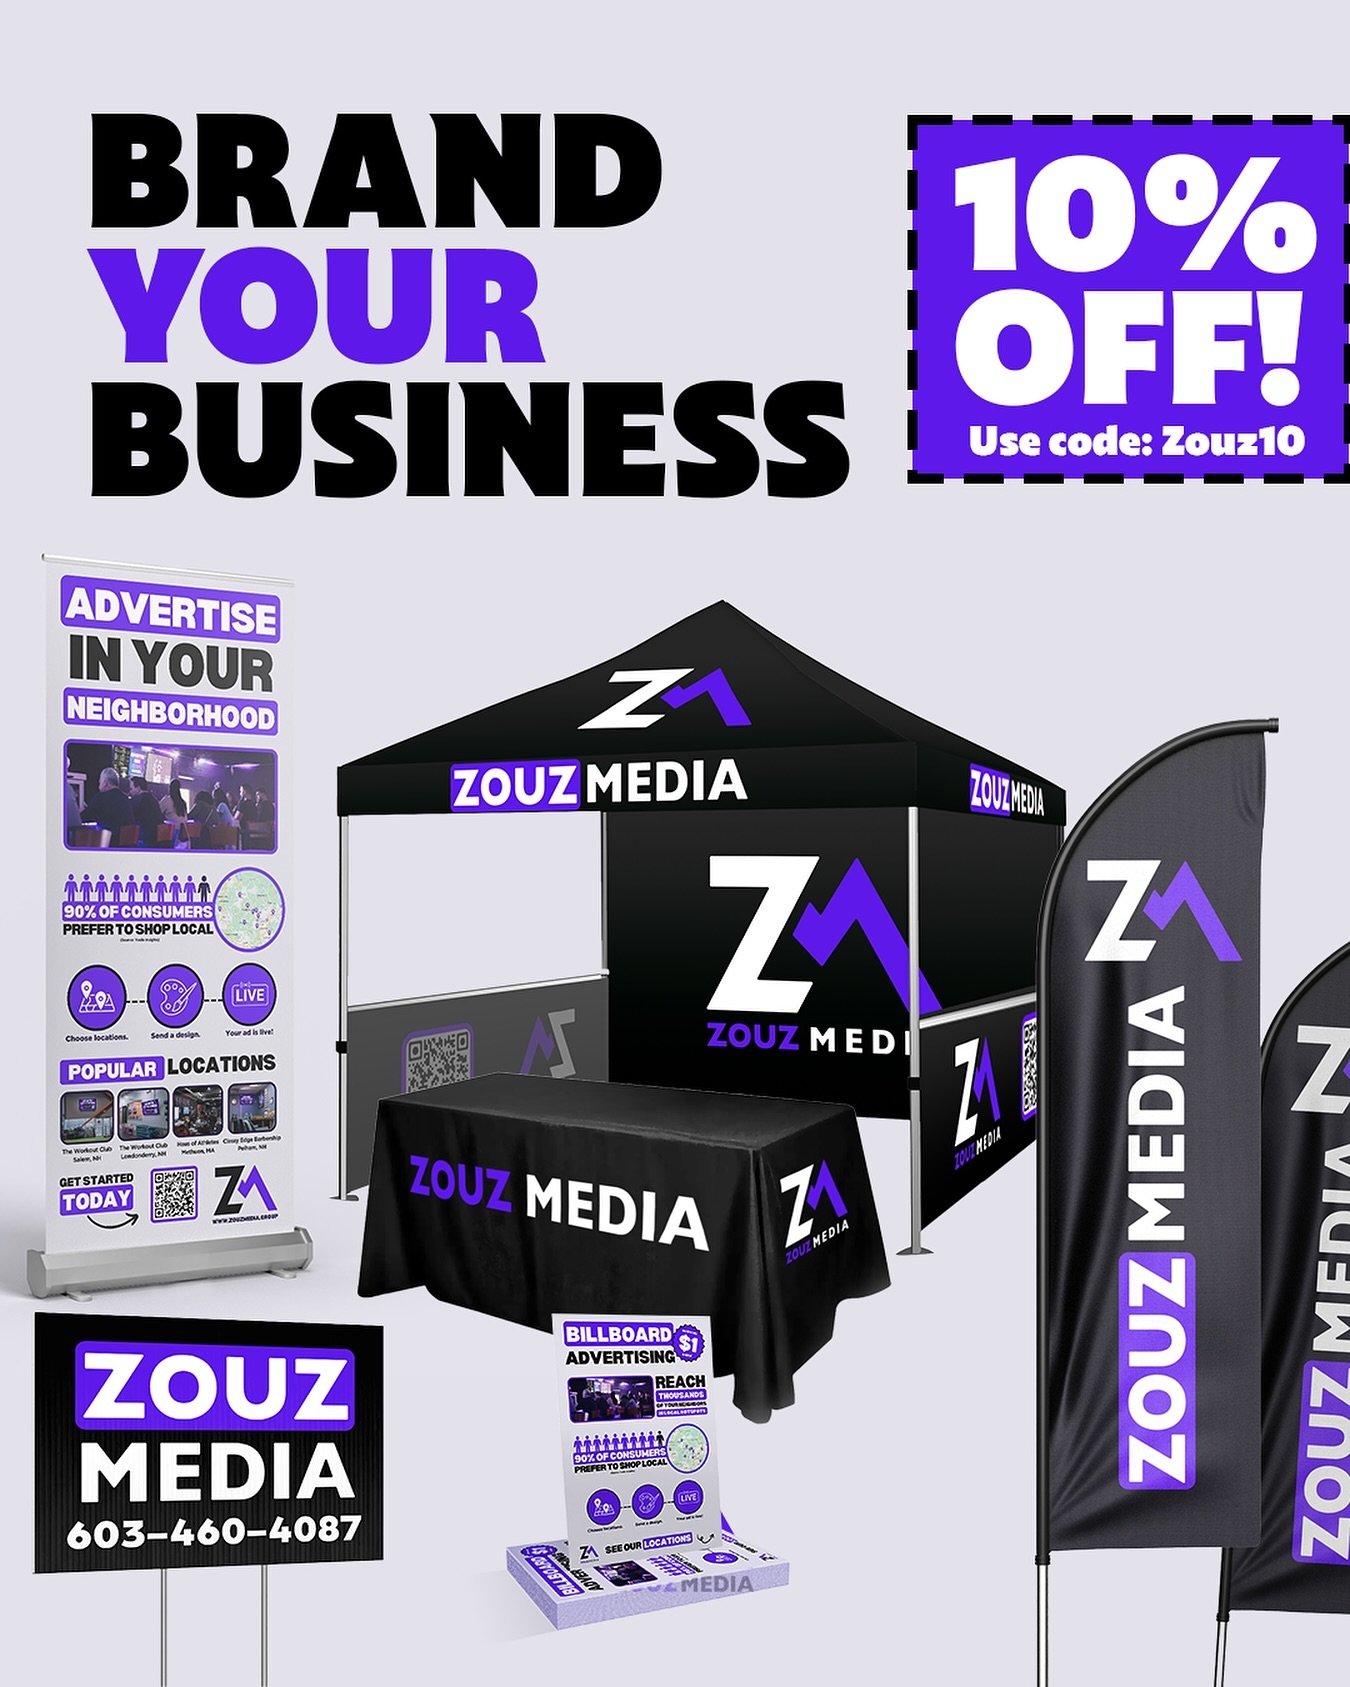 Now is the season to elevate your brand with our stunning printed products! From vibrant banners to sleek event displays, we&rsquo;ve got the tools to make your message shine. Use code: &ldquo;ZOUZ10&rdquo; at checkout for 10% OFF your order!